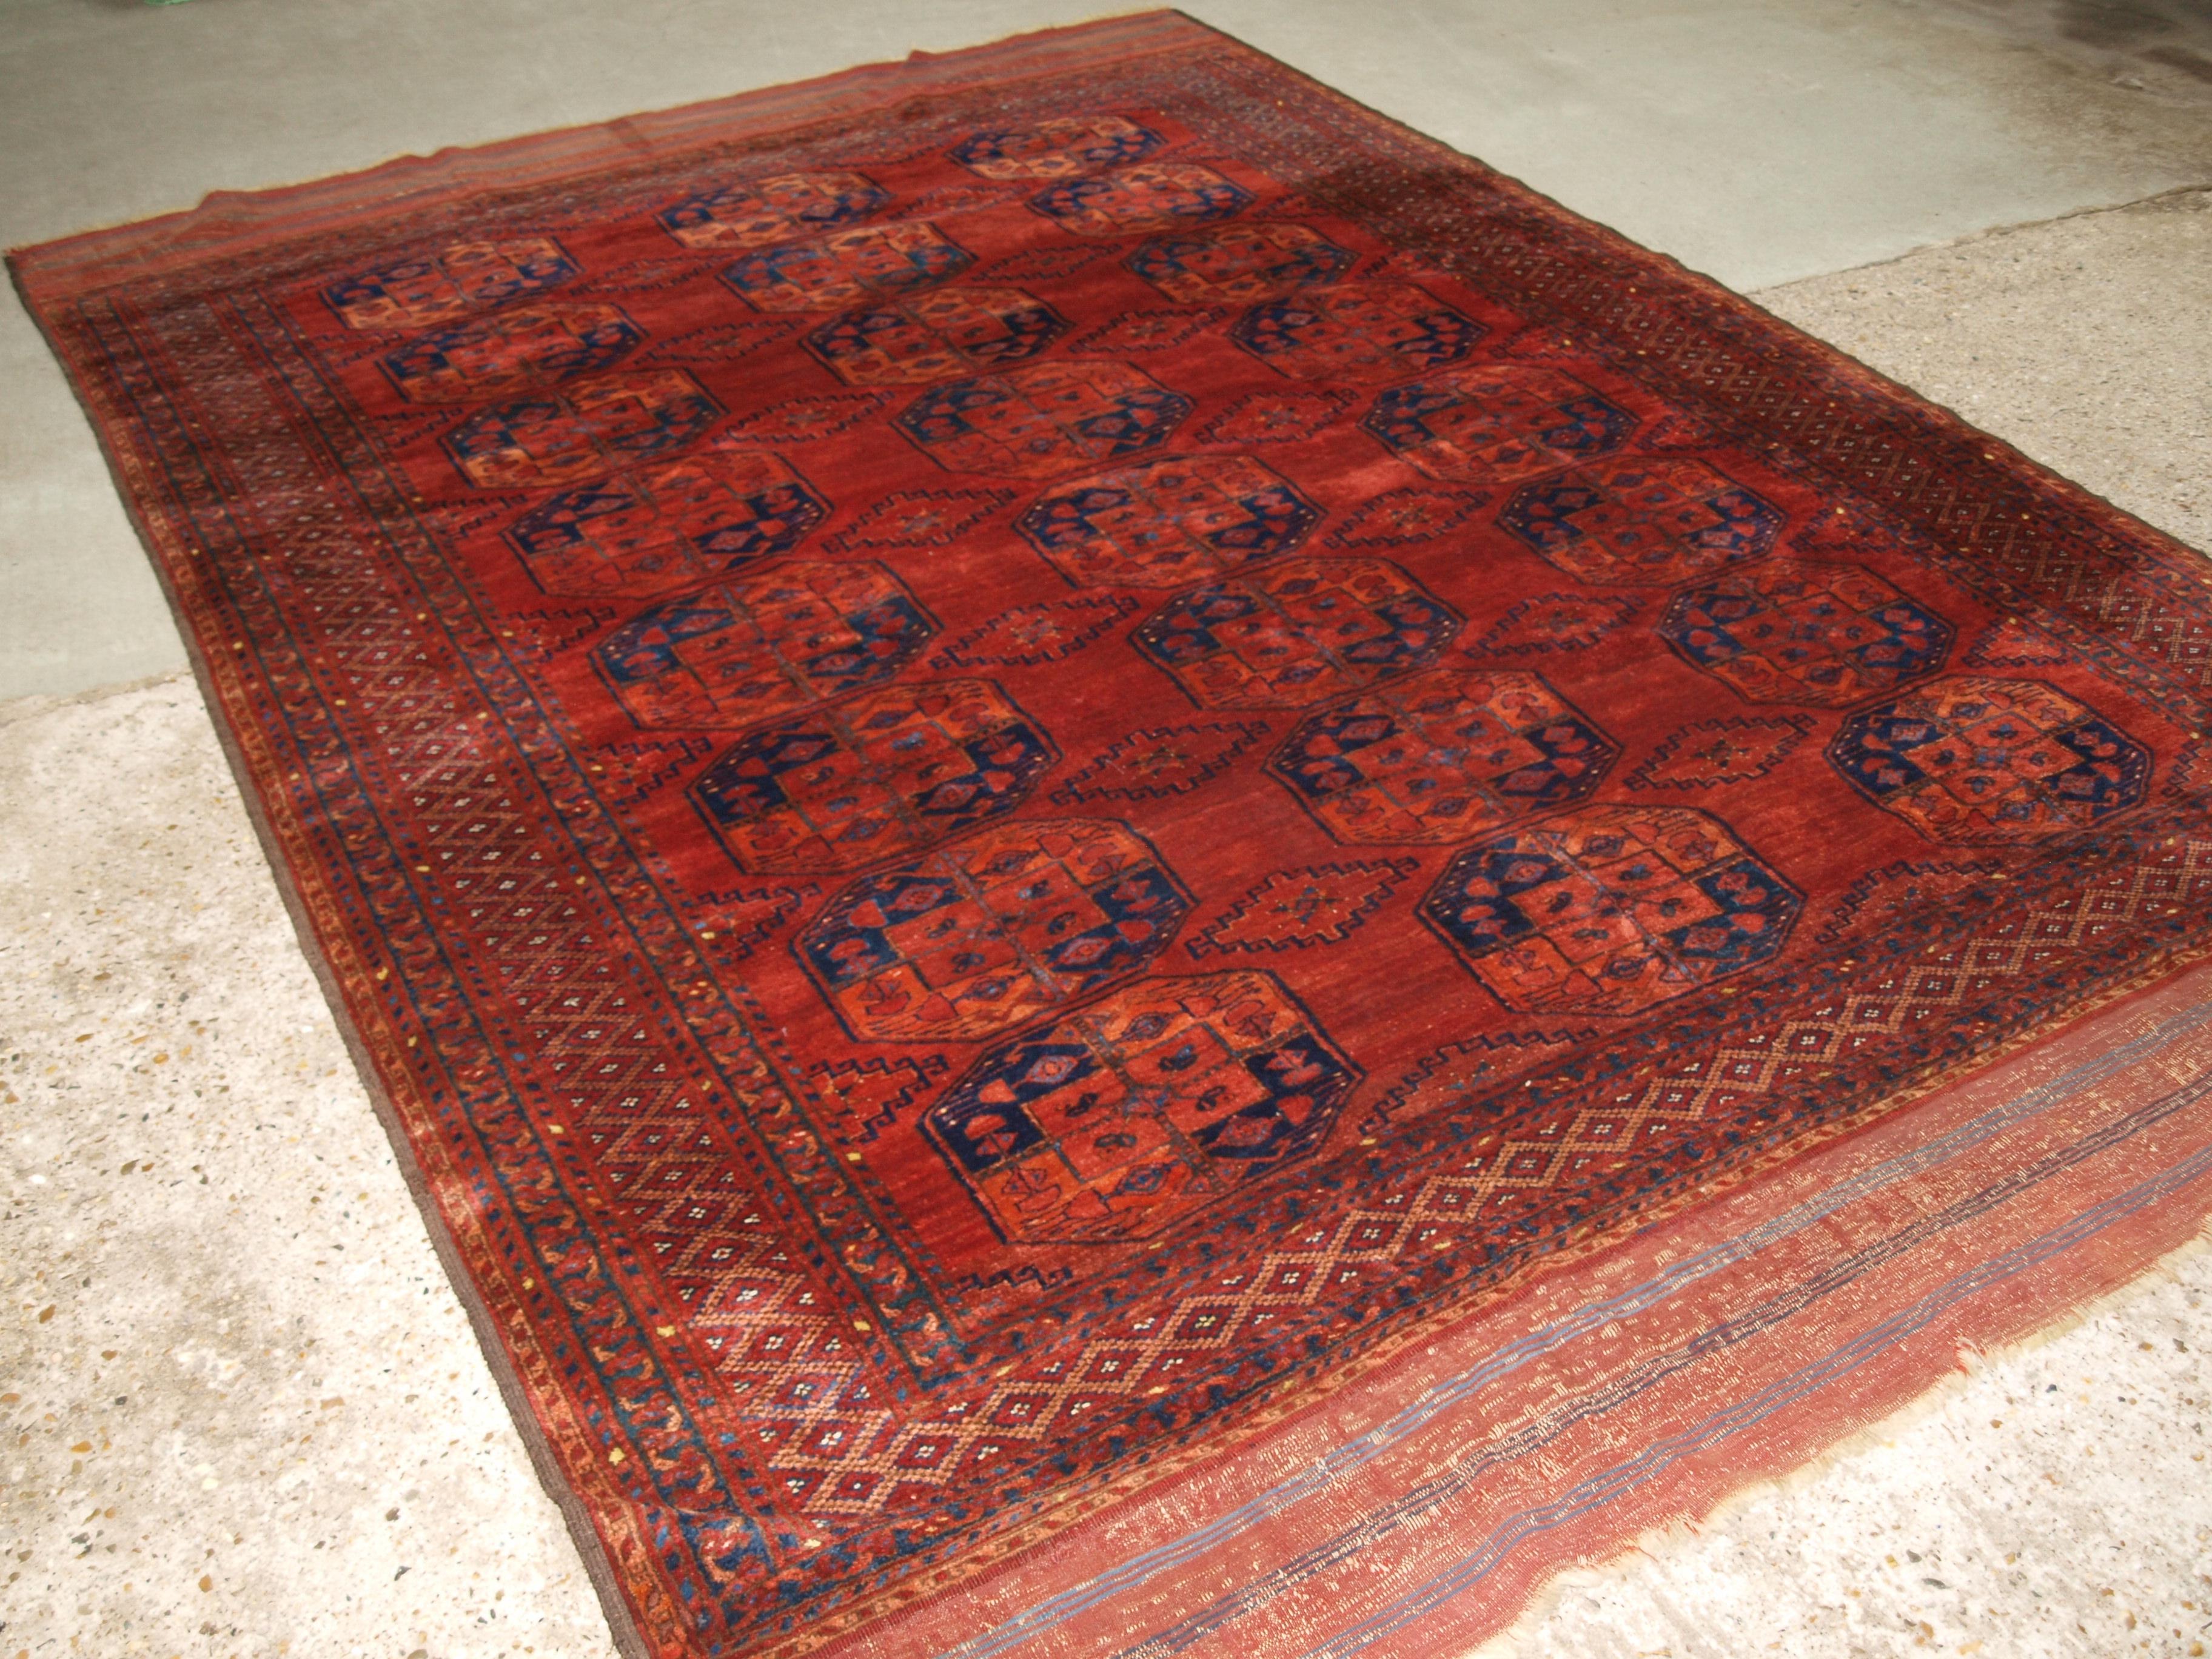 An antique Ersari Turkmen main carpet from Northern Afghanistan. This fine carpet has three rows of eight large guls with a diamond shaped minor gul. The colours in this carpet are truly outstanding and the images do not do them justice.

The